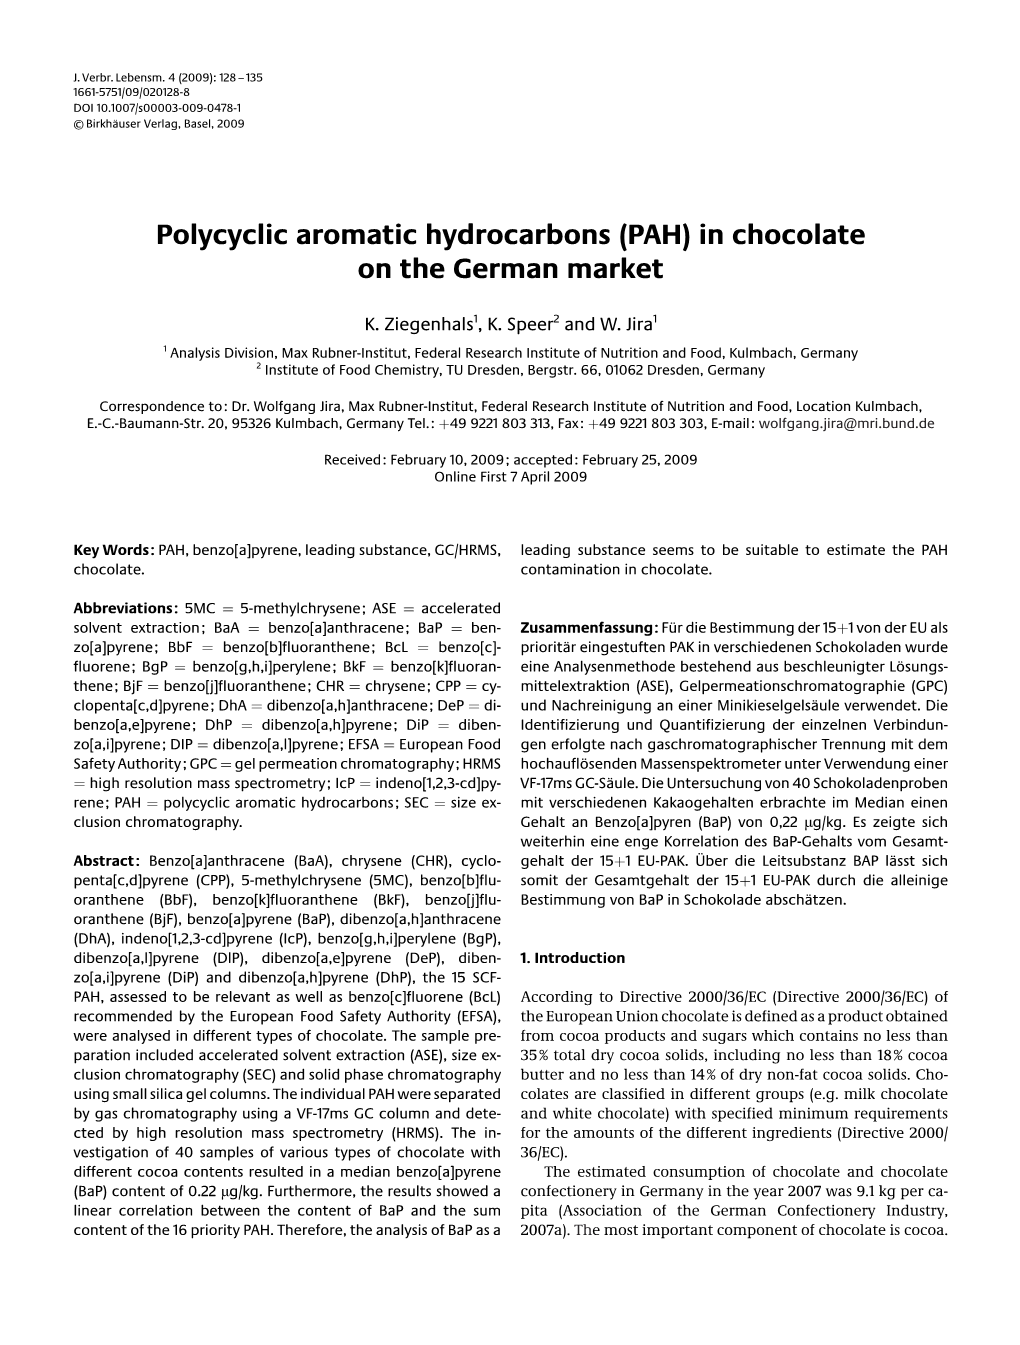 Polycyclic Aromatic Hydrocarbons (PAH) in Chocolate on the German Market